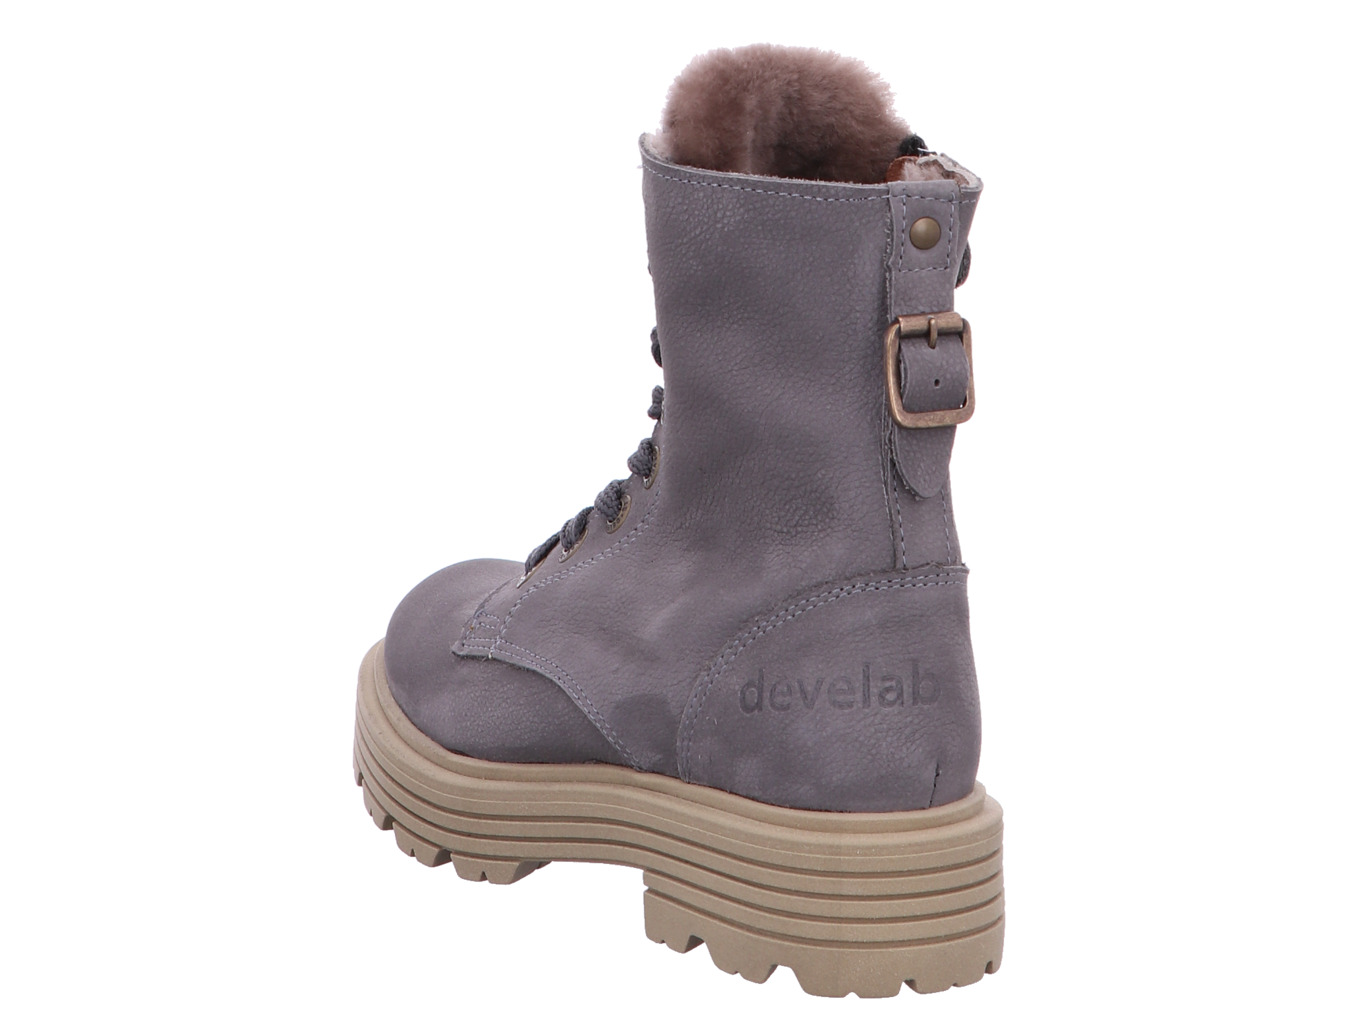 develab_girls_mid_boot_laces_42848_824_5147